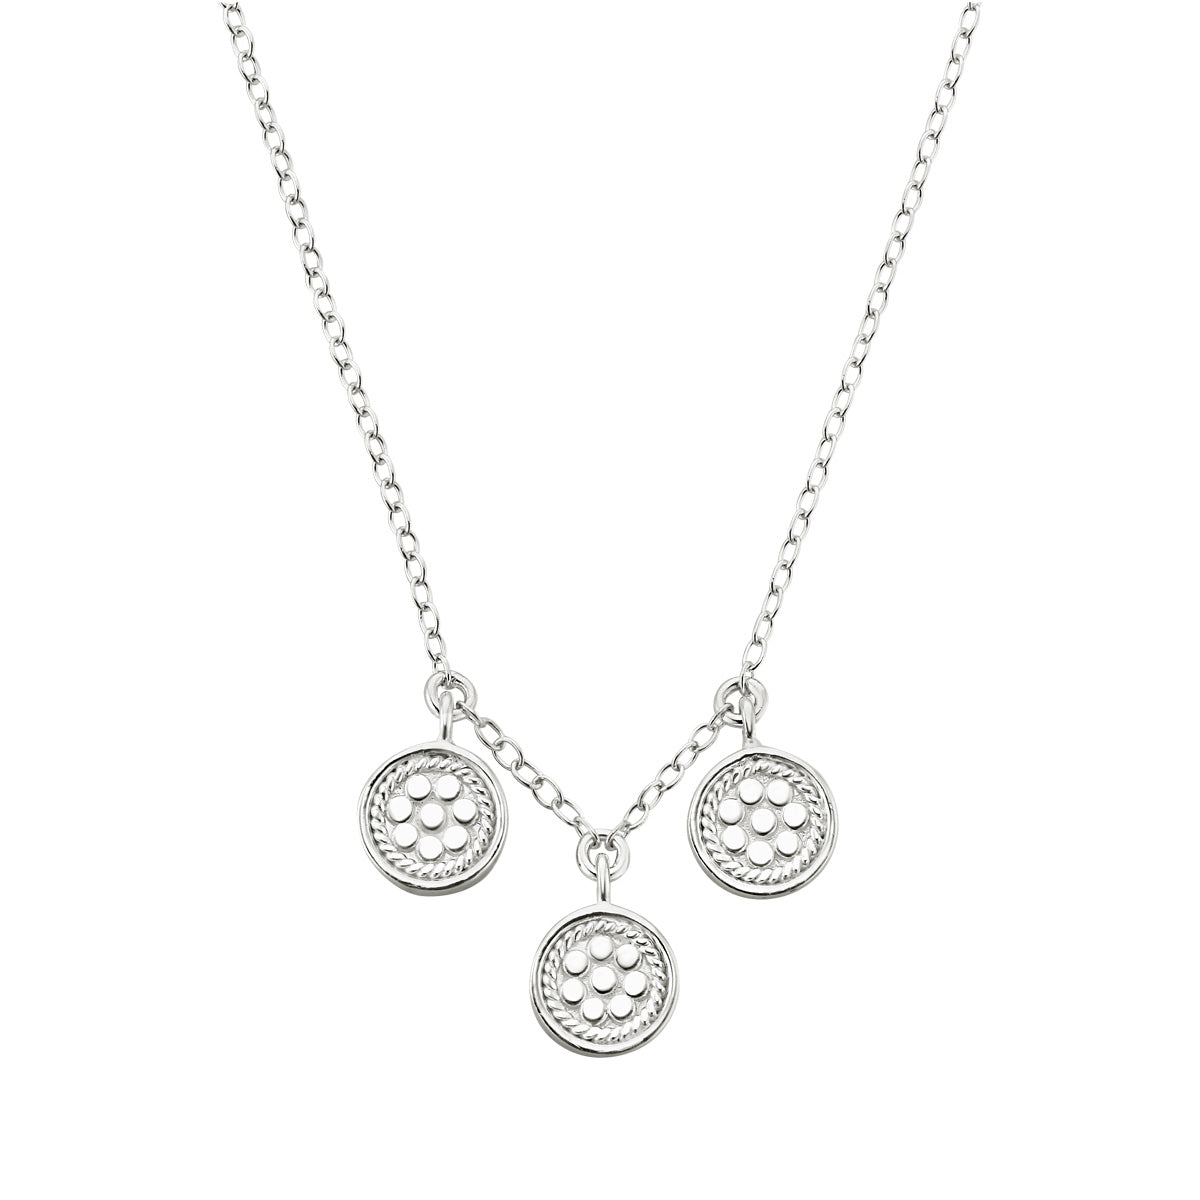 Ana Beck 18kt gold plated and sterling silver Reversible Triple Disk Charm Necklace